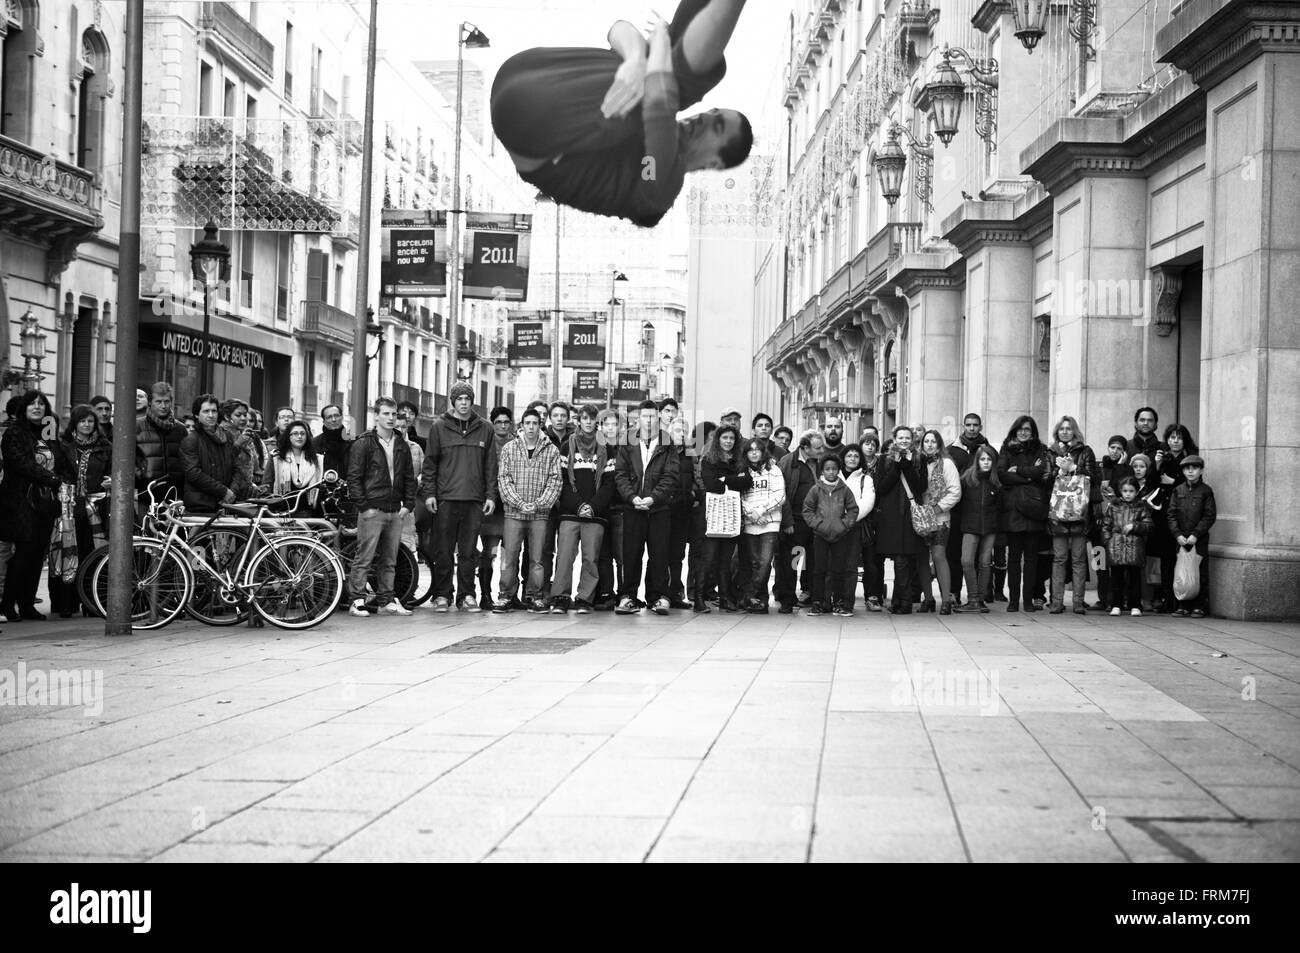 BARCELONA, SPAIN - JAN 4: Unidentified urban street dancers performances for tourists on January 4, 2011 in Barcelona. These are Stock Photo